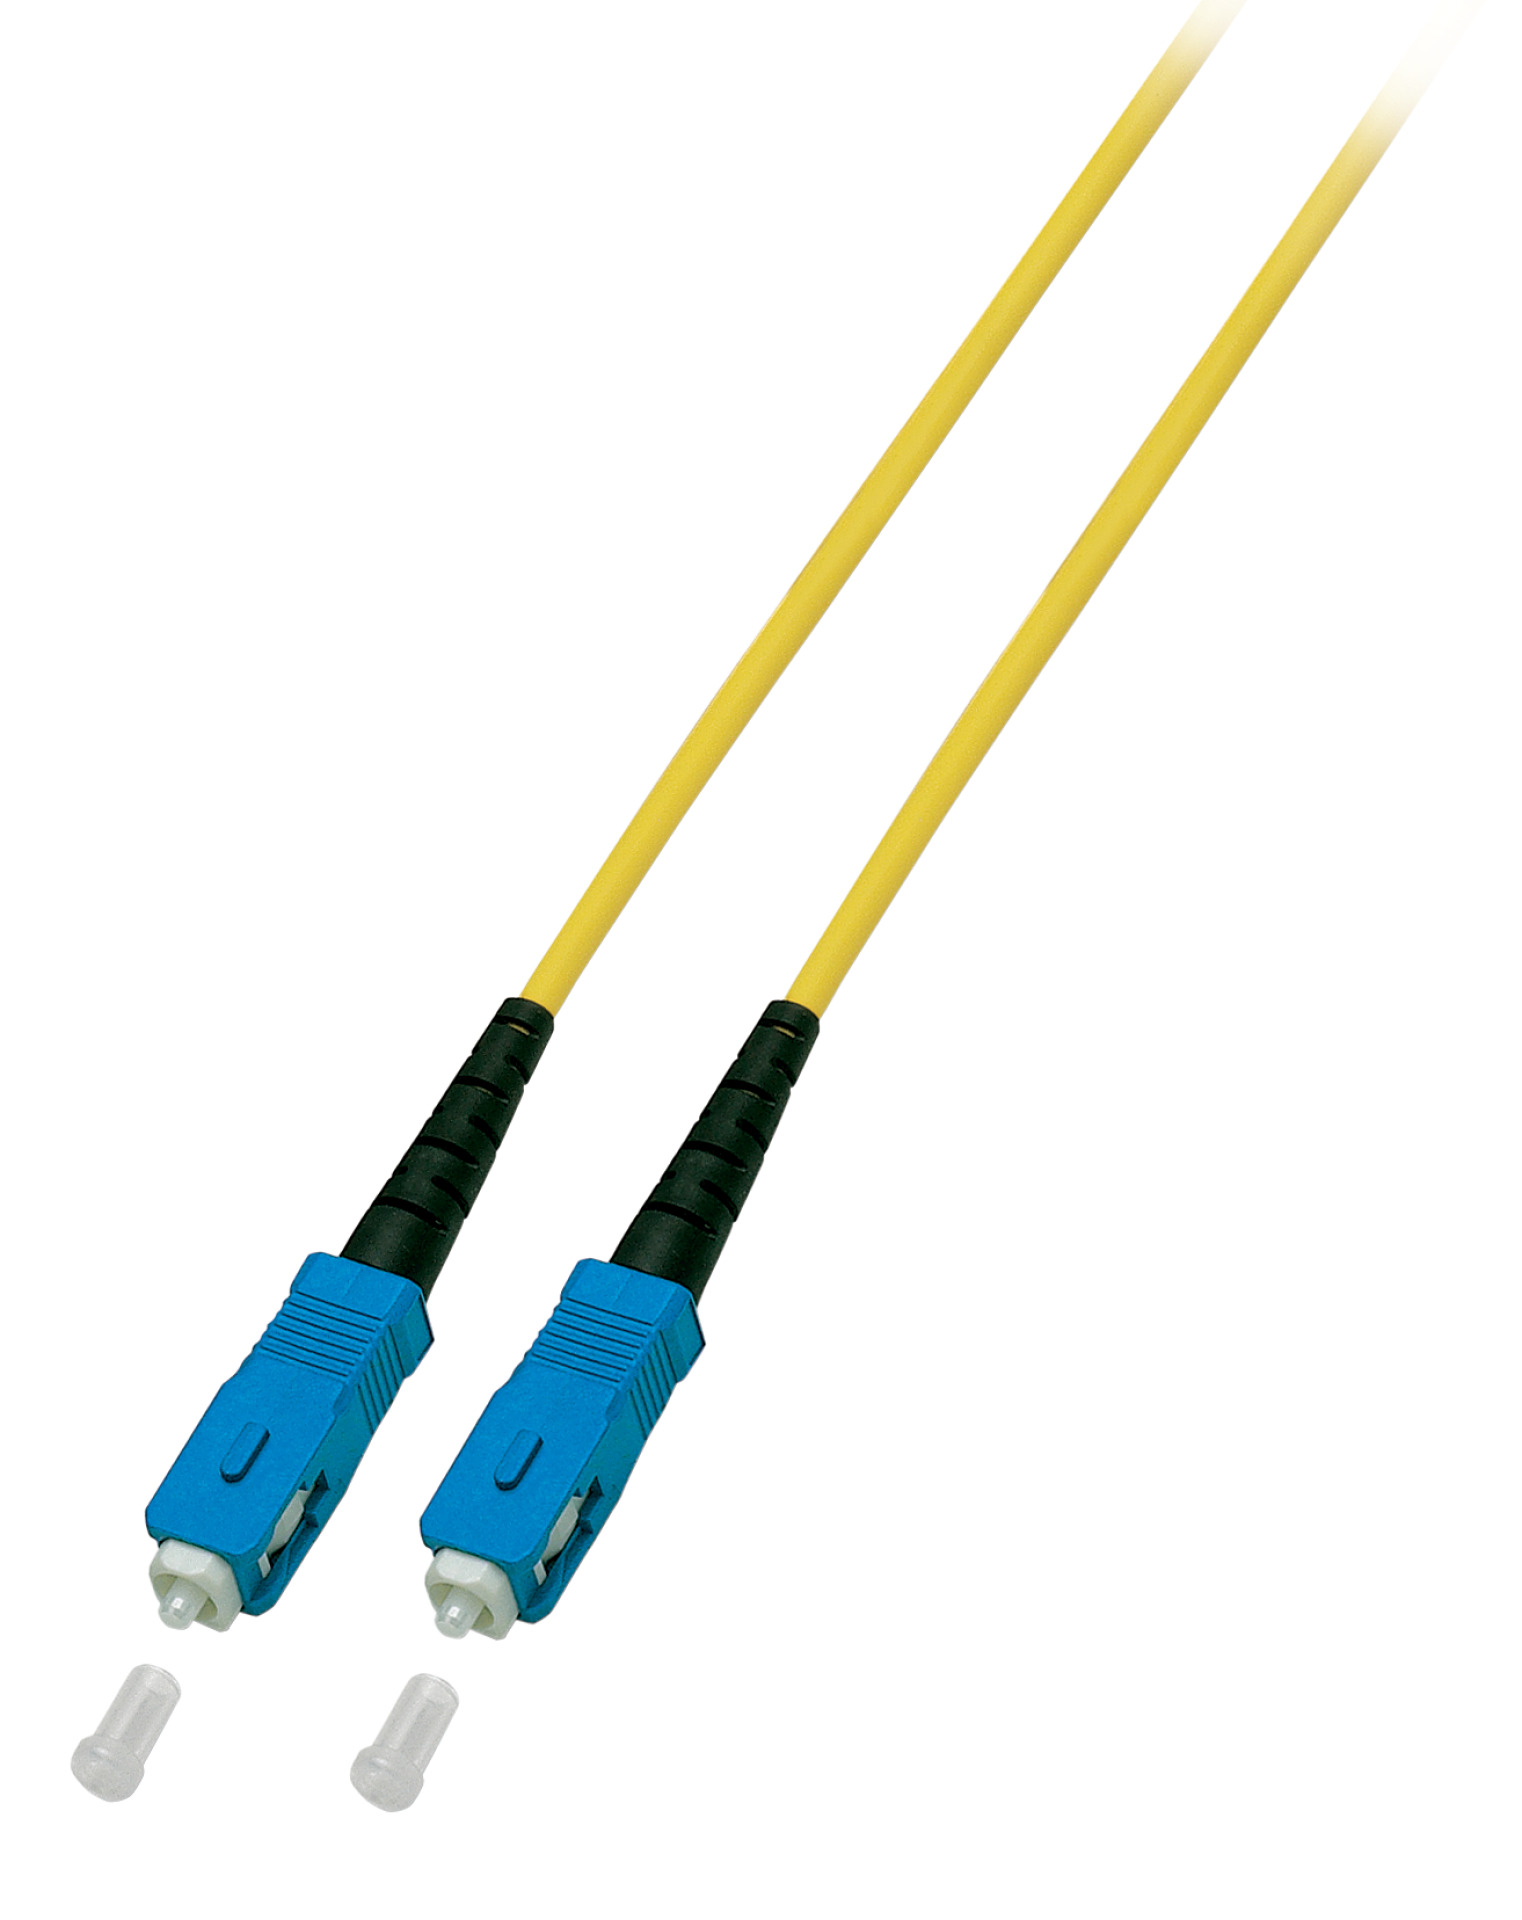 Simplex FO Patch Cable SC-SC G657.A2 10m 3,0mm yellow 9/125µm